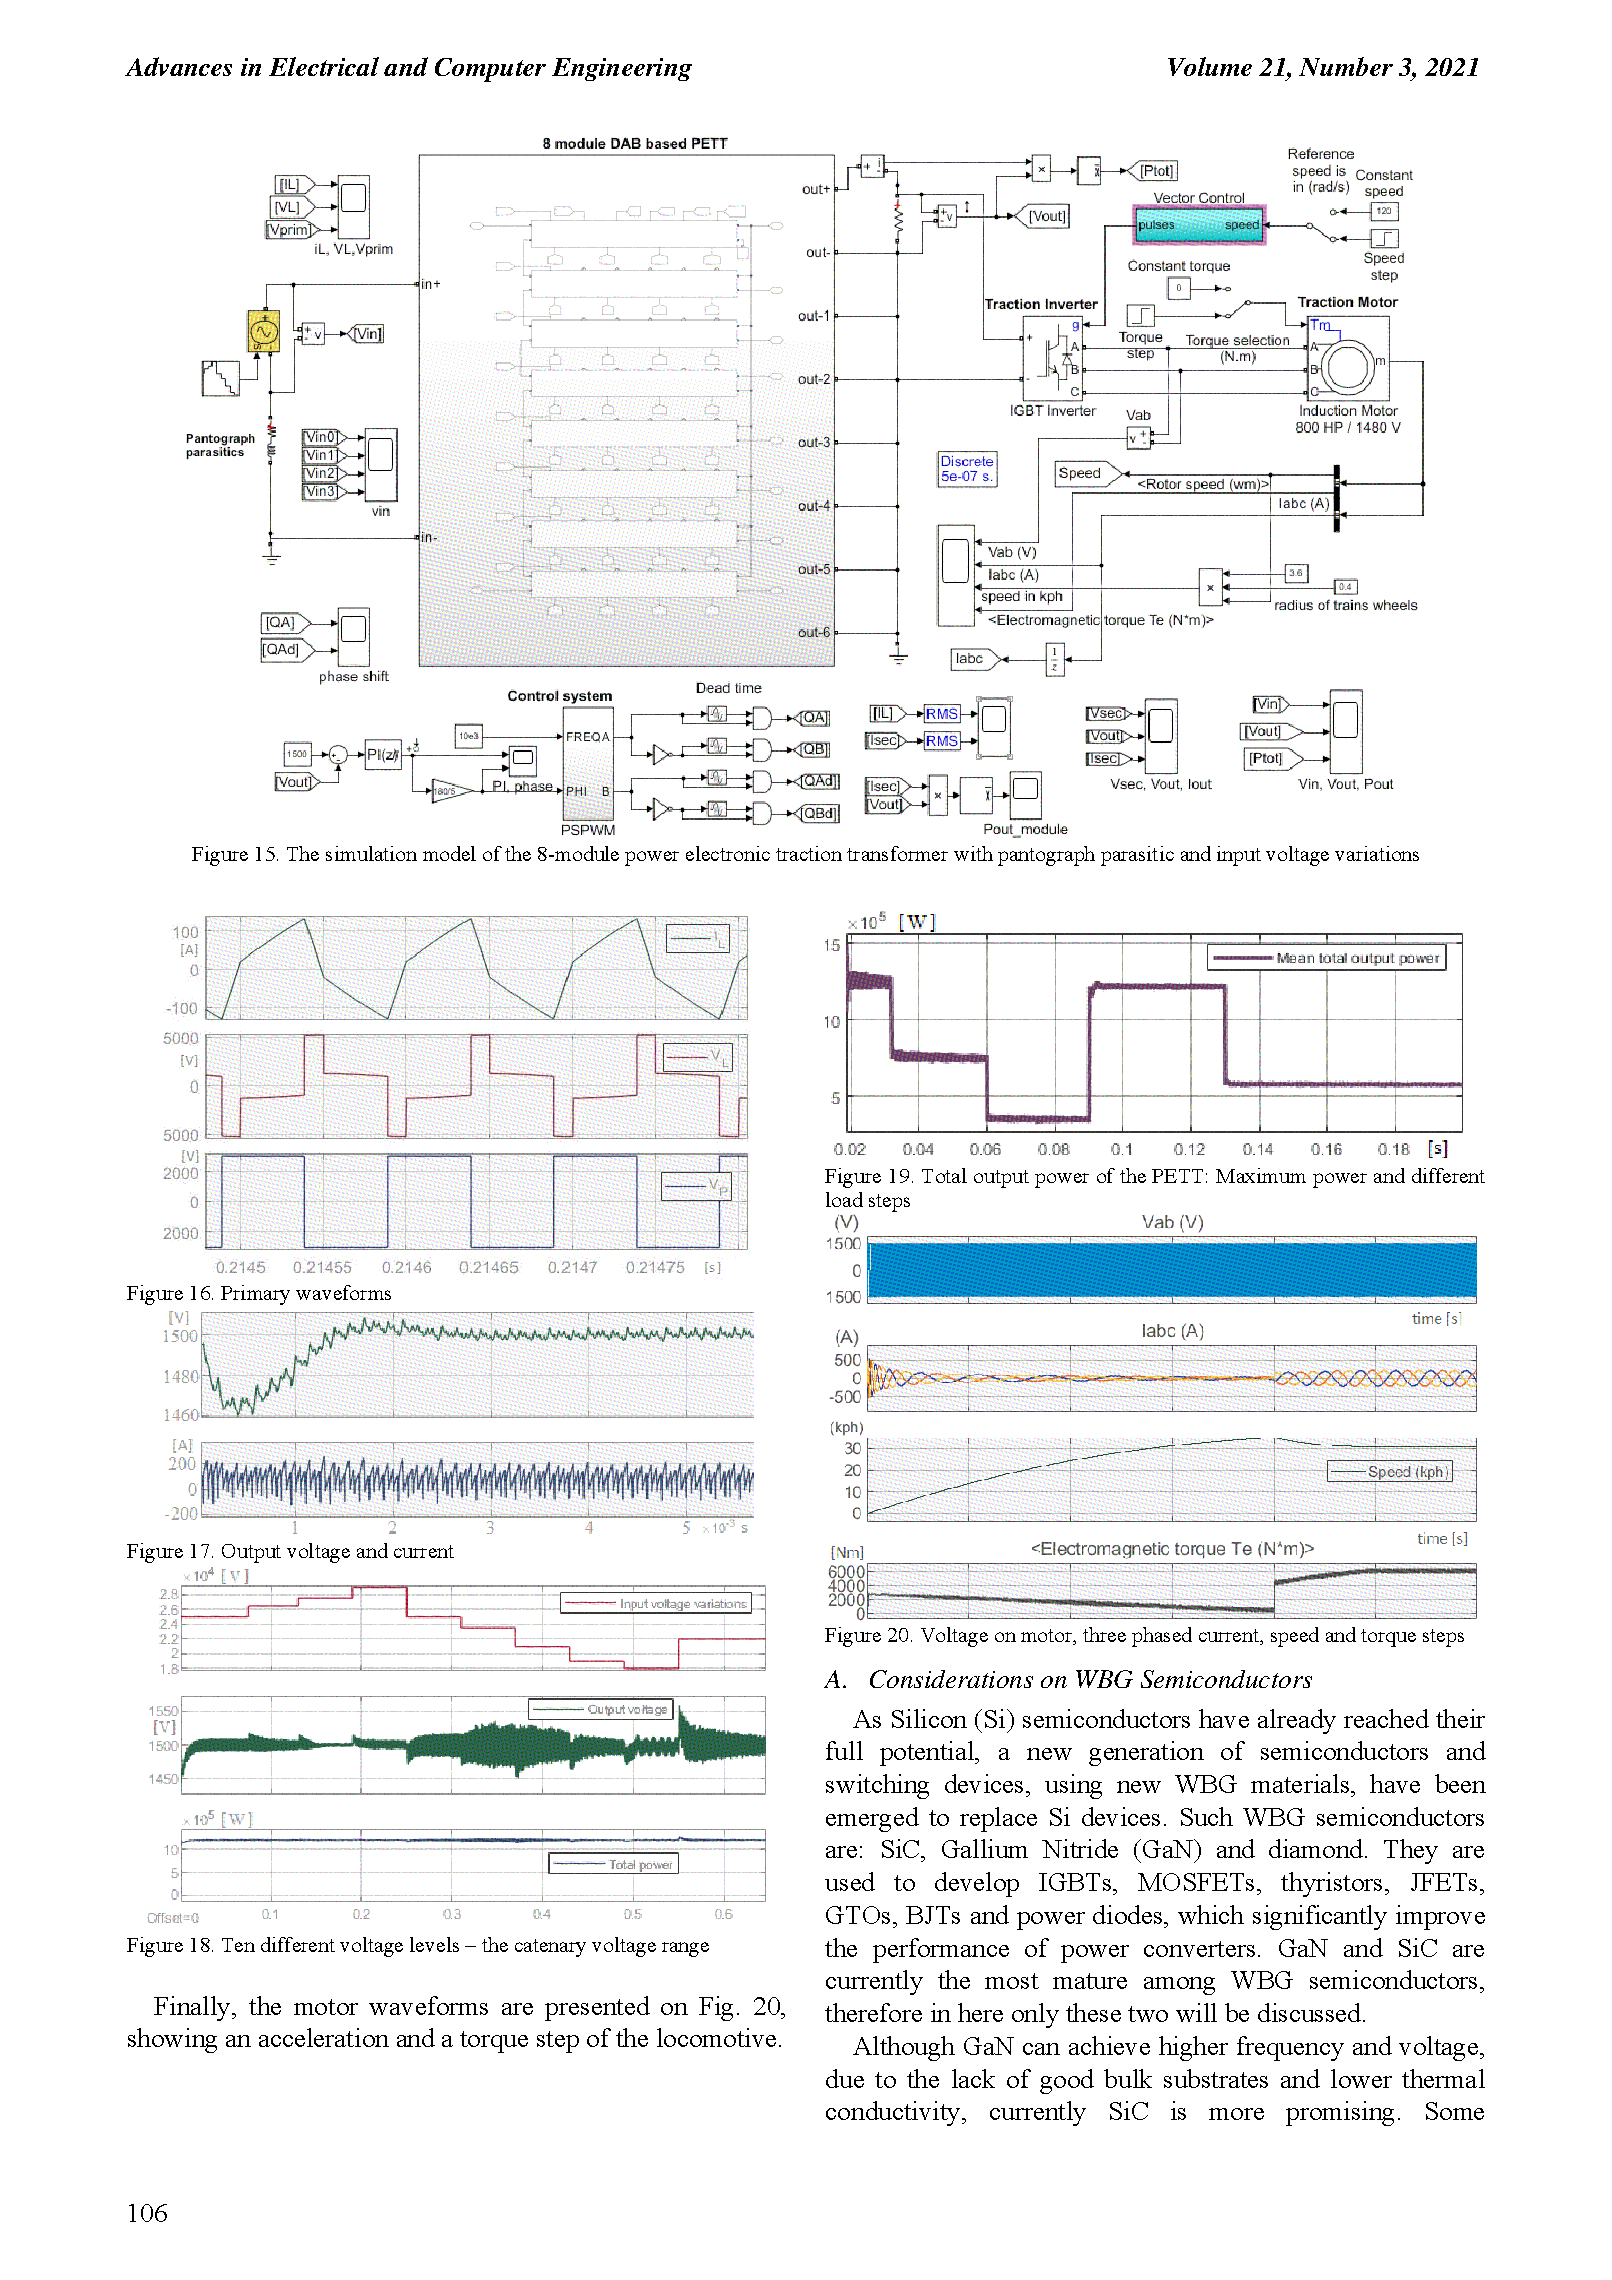 PDF Quickview for paper with DOI:10.4316/AECE.2021.03012